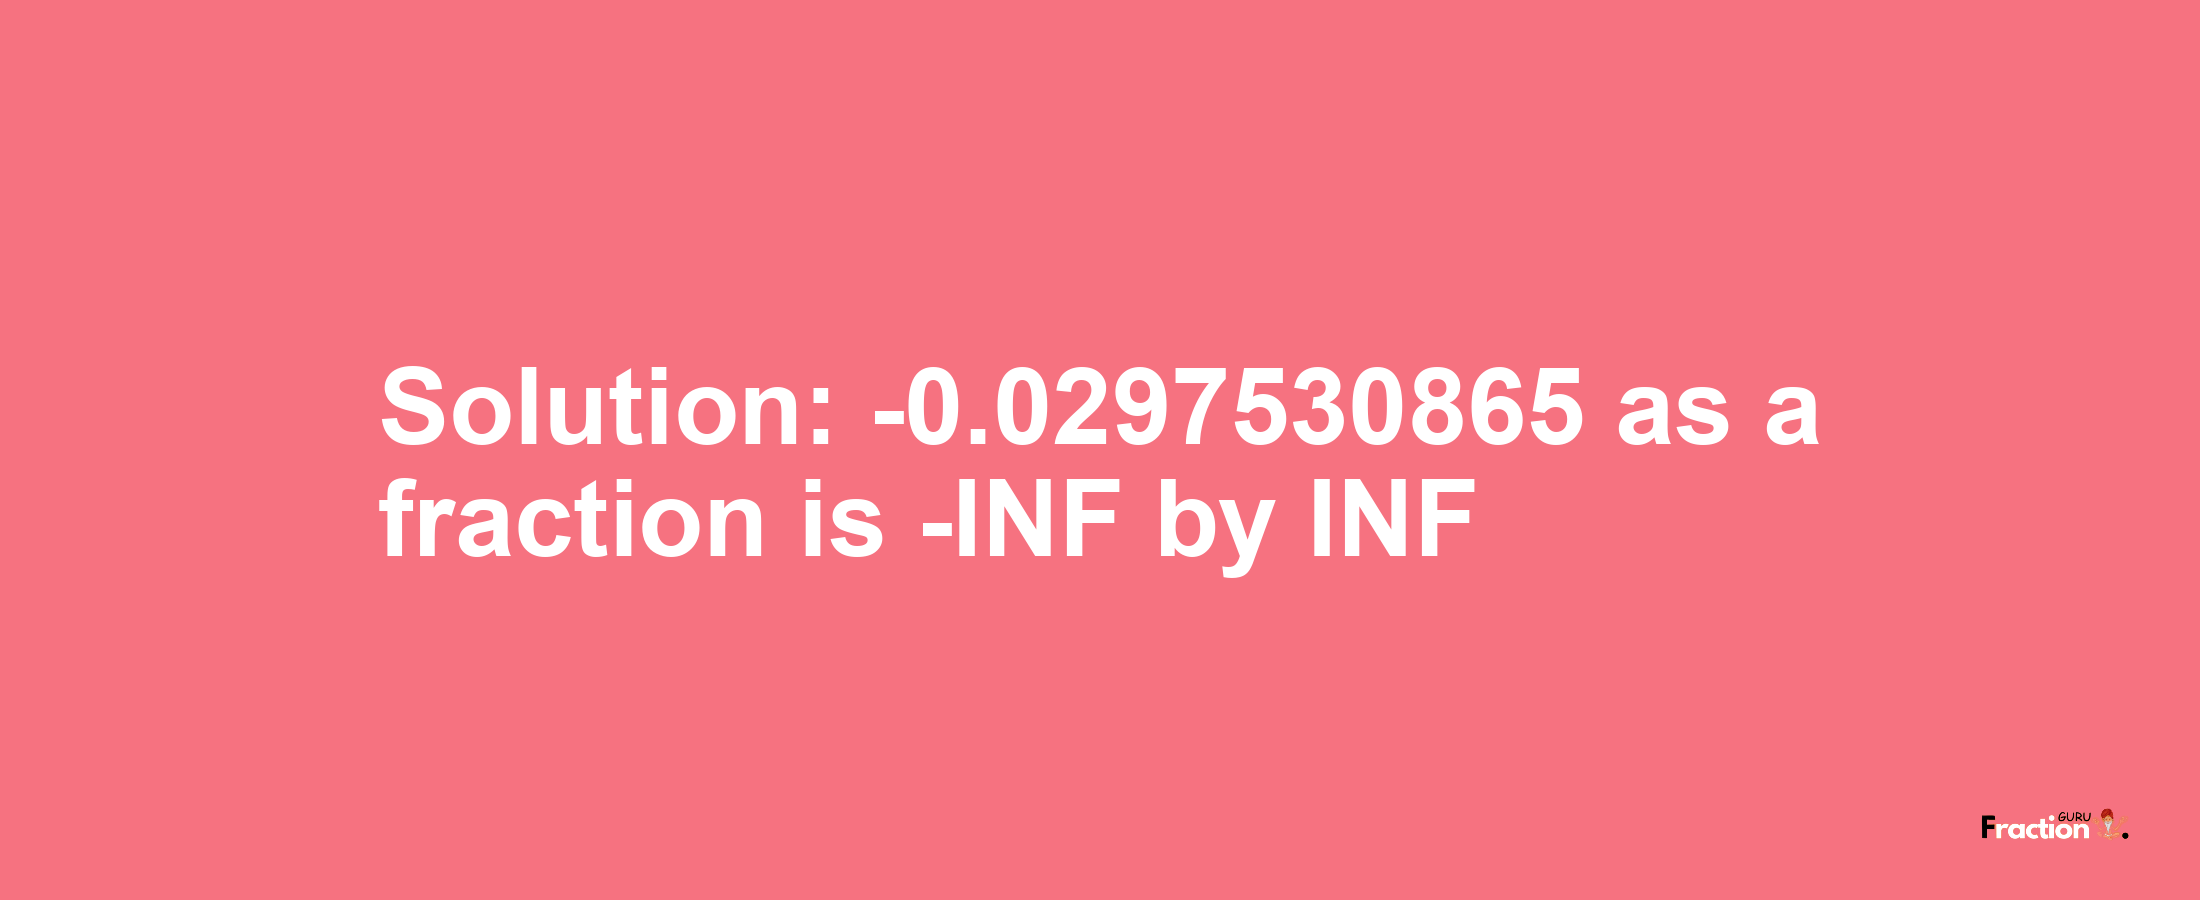 Solution:-0.0297530865 as a fraction is -INF/INF